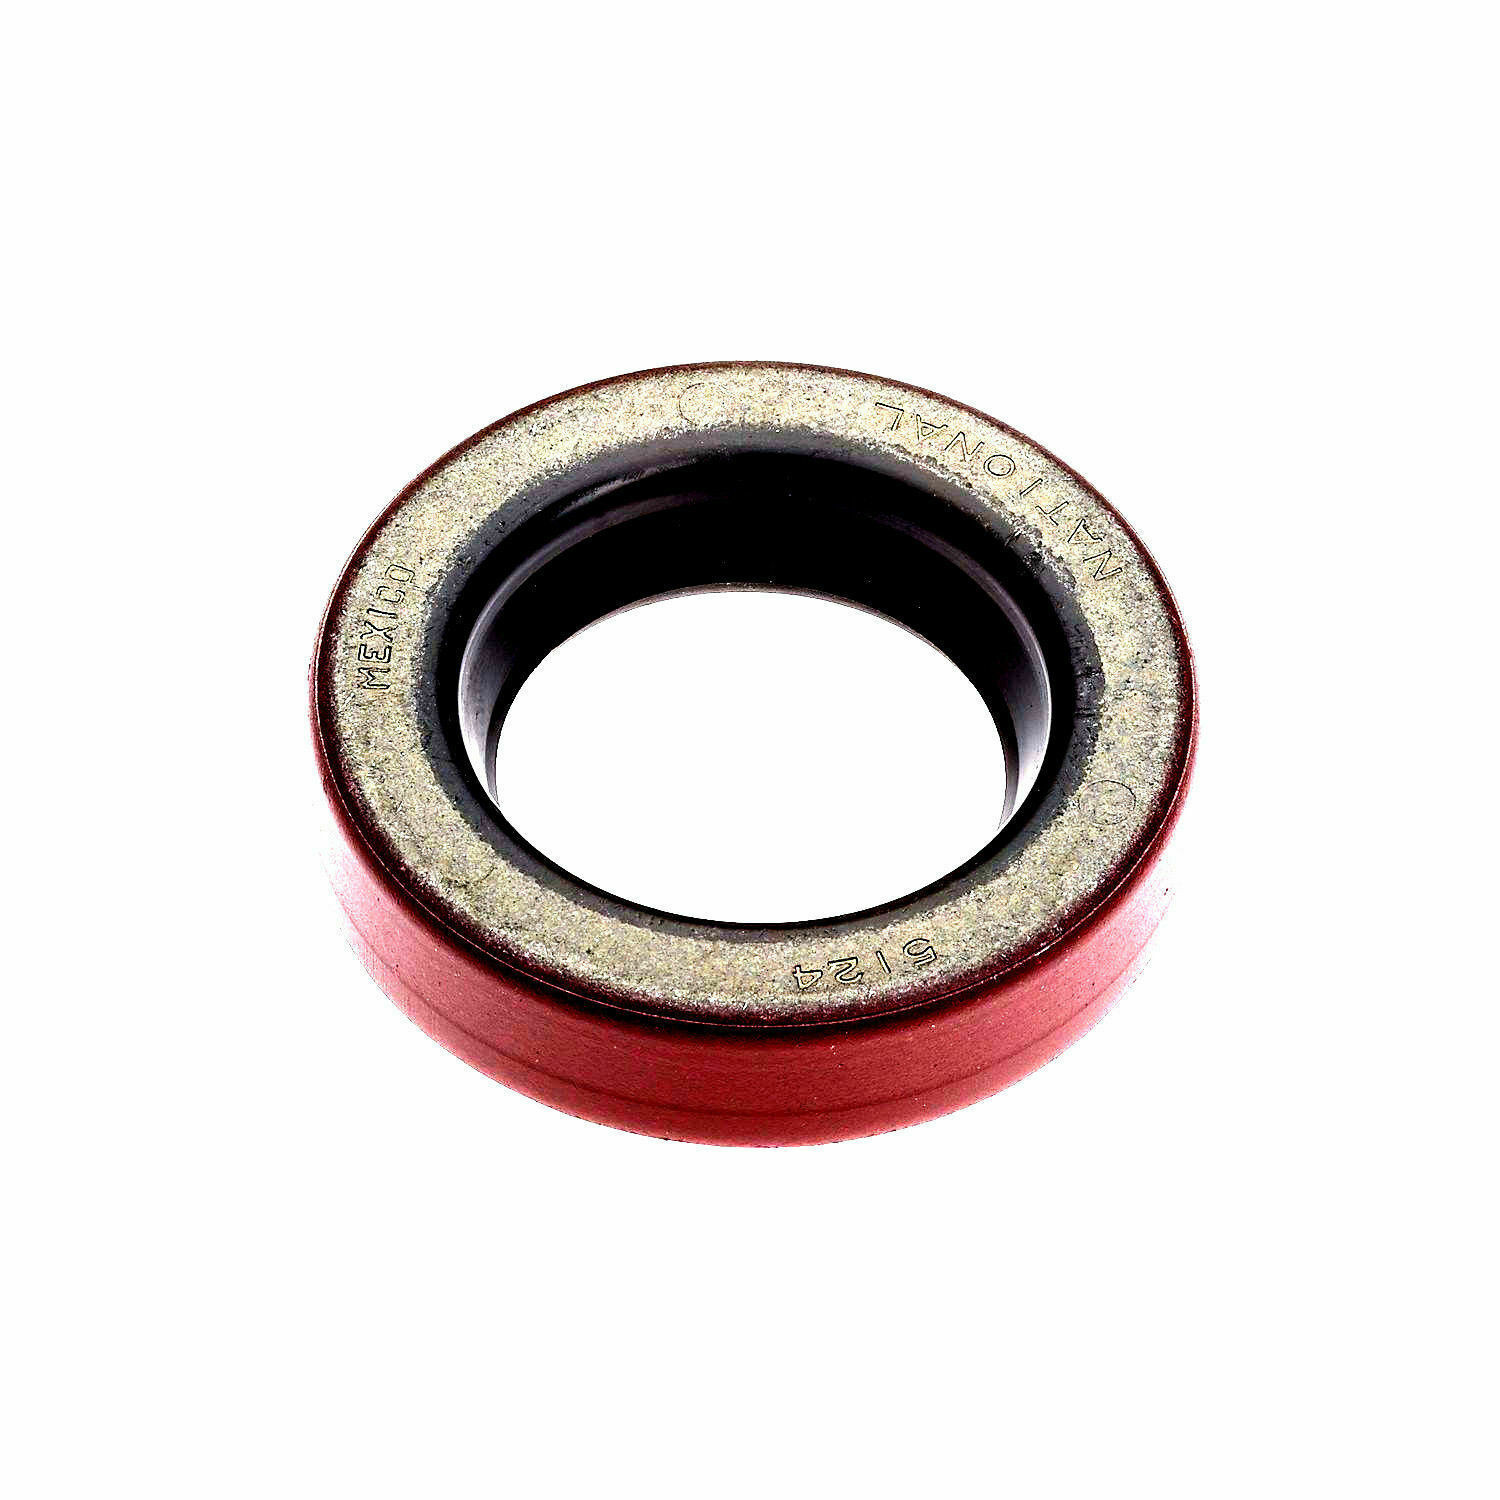 National Oil Seals 5124 Wheel Seal Plymouth Dodge 1972-1976 Brand New! - $12.75